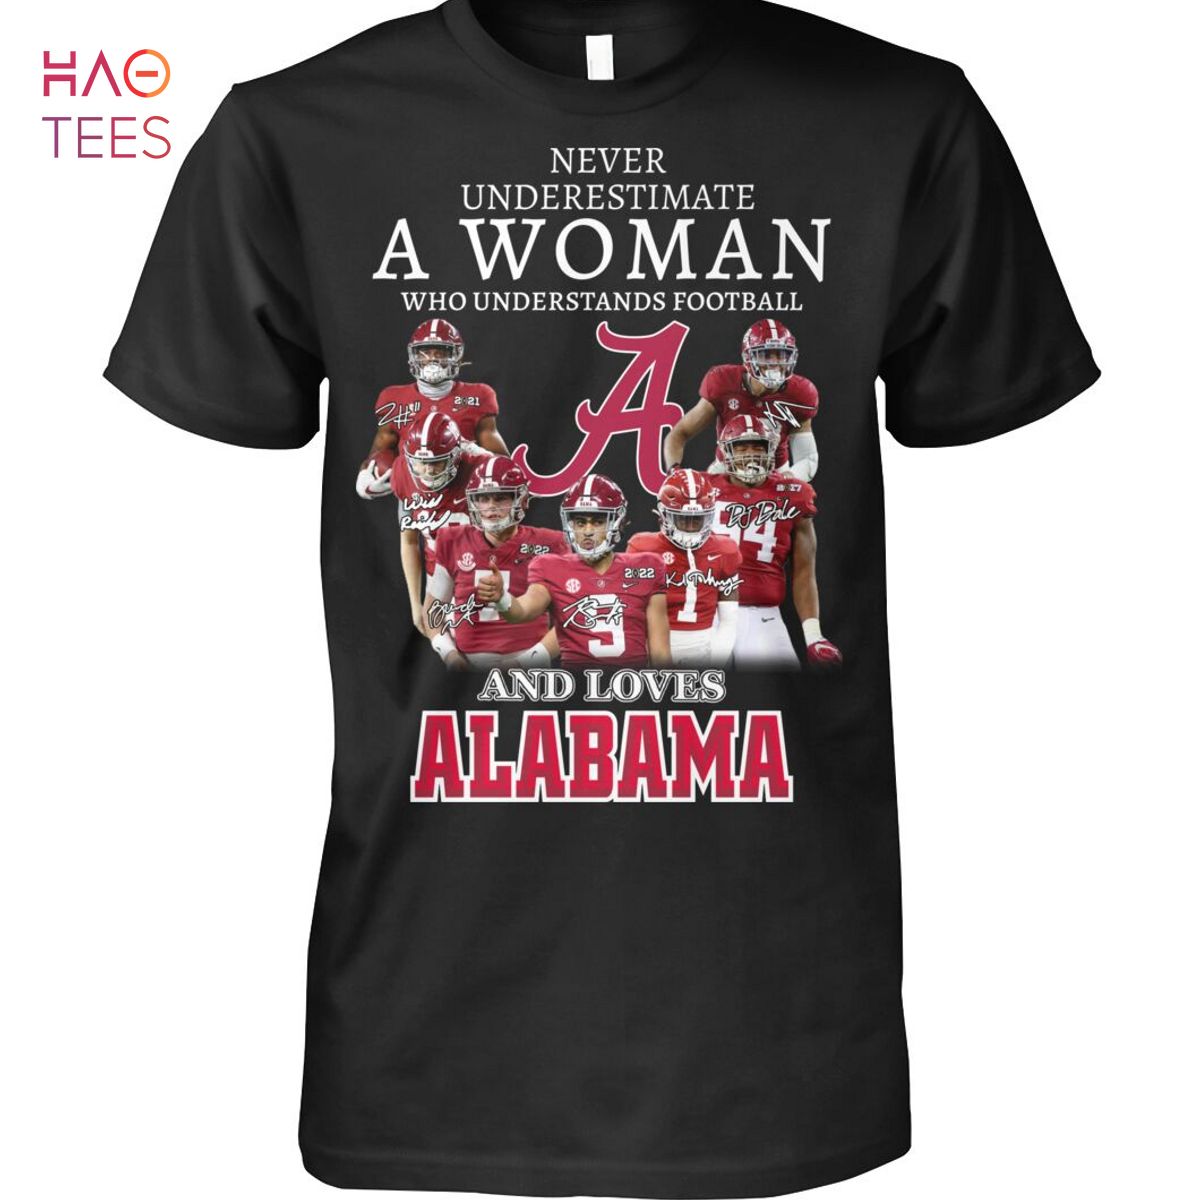 THE BEST Alabama Shirt Limited Edition